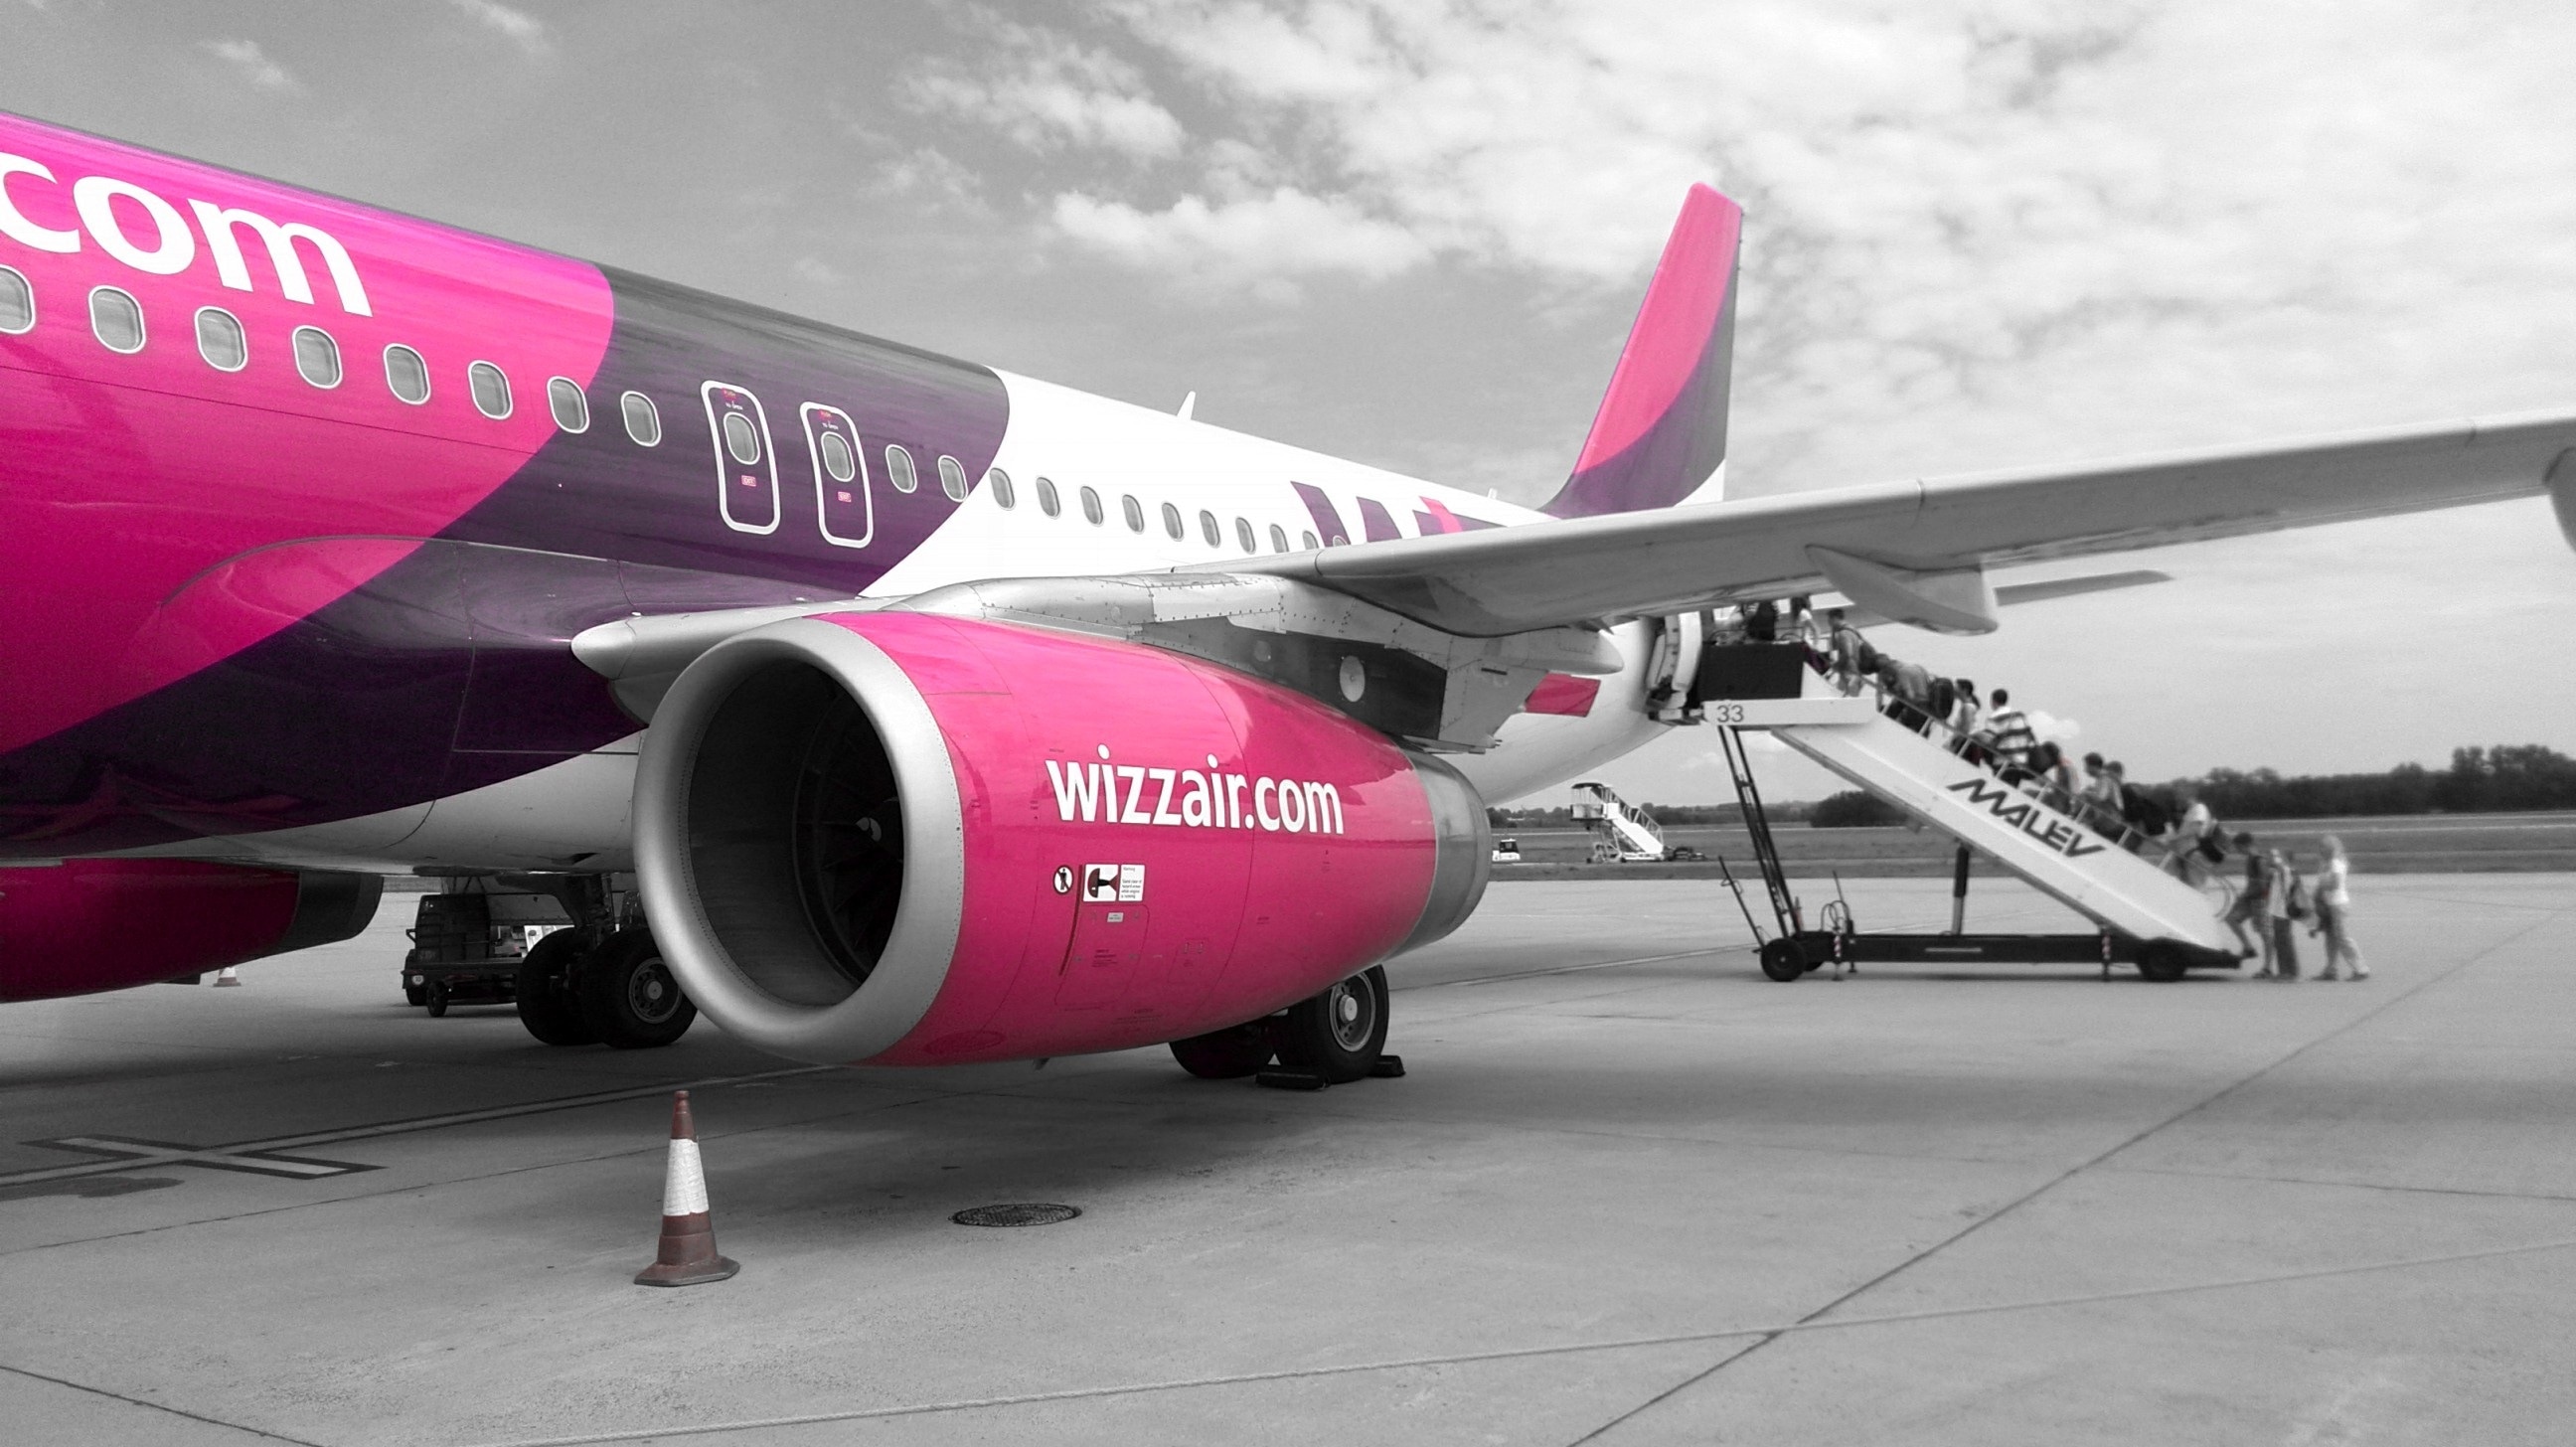 white and pink wizzair.com airplane